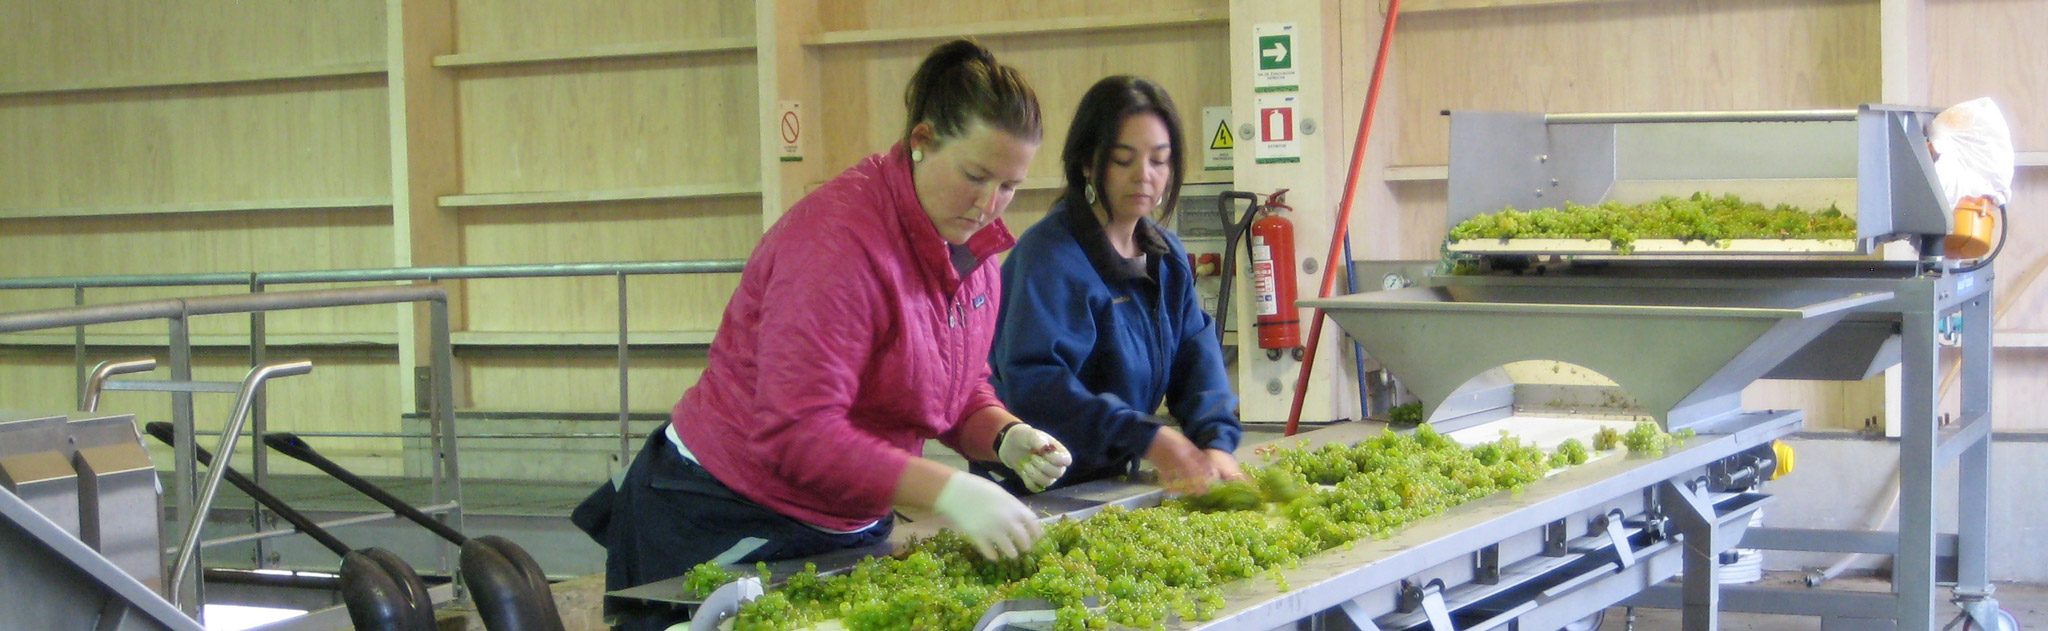 2011 Intern, Whitney Ulvestad, sorting grapes with Evelyn Vidal